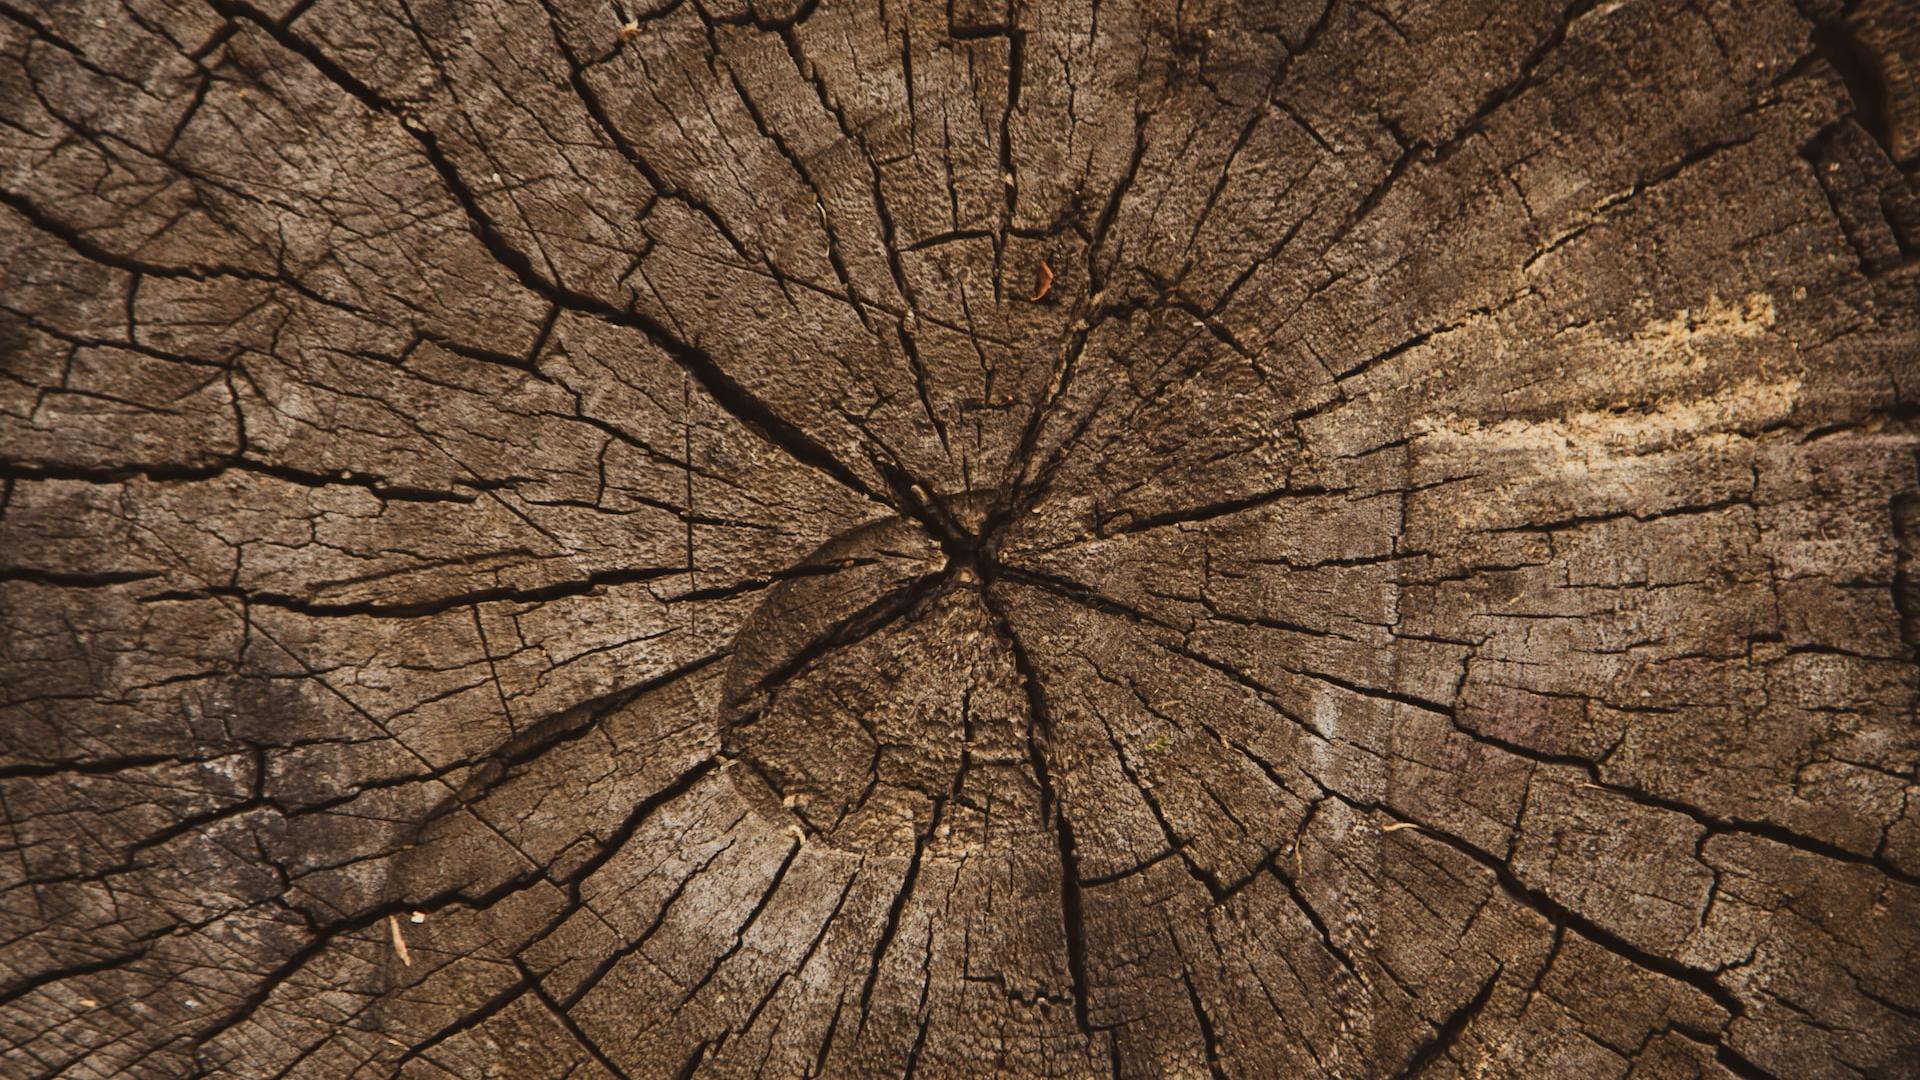 Cross section of a tree trunk that shows the annual growth rings